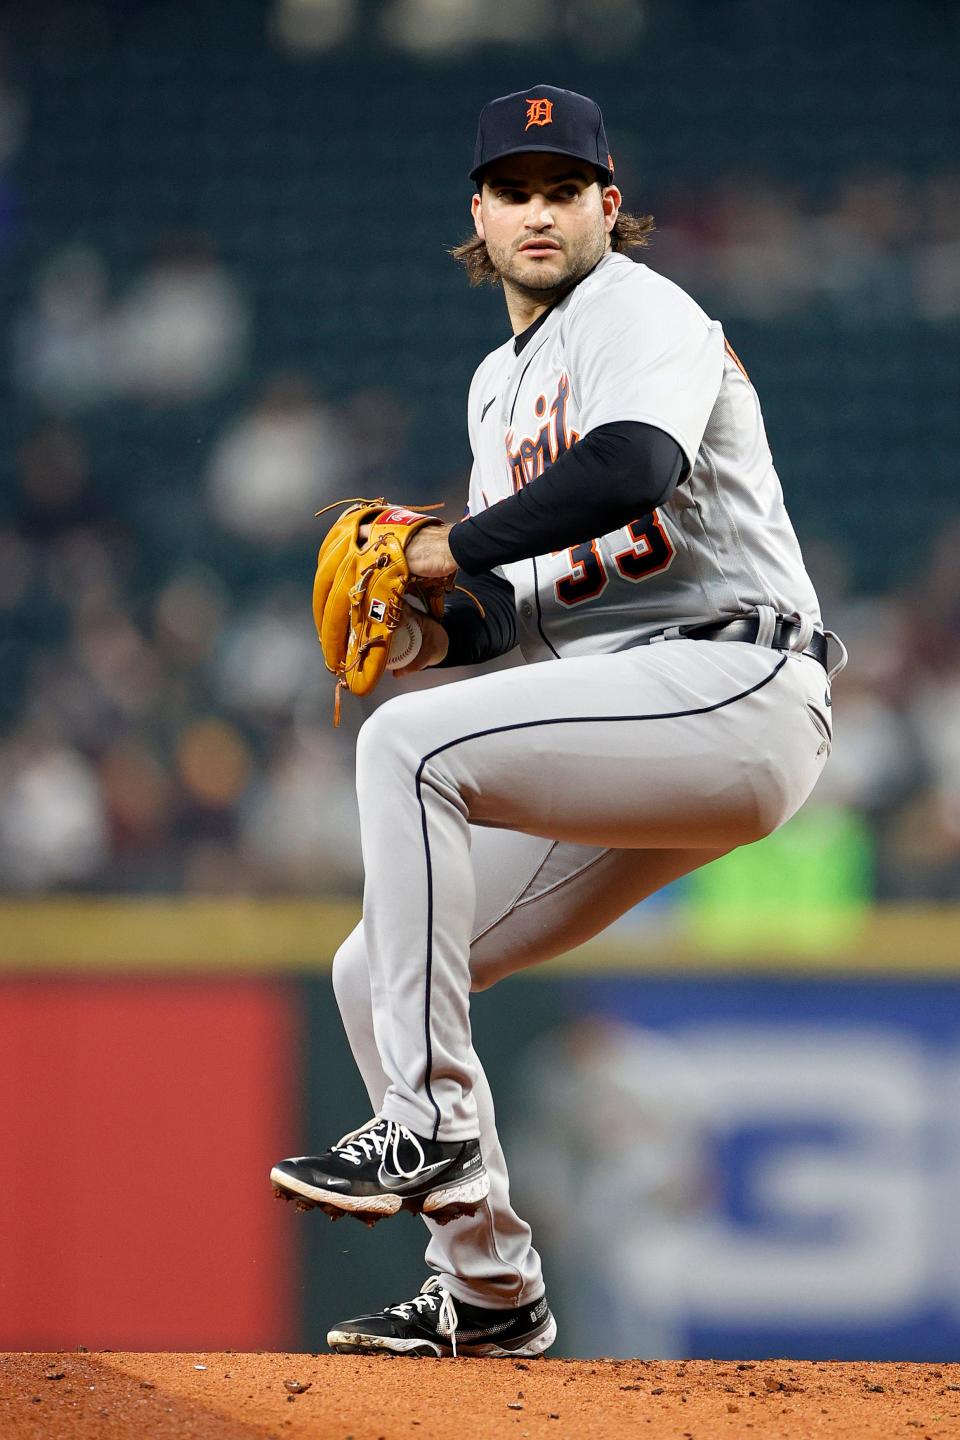 Tigers pitcher Bryan Garcia pitches during the first inning against the Mariners on Monday, Oct. 3, 2022, in Seattle.